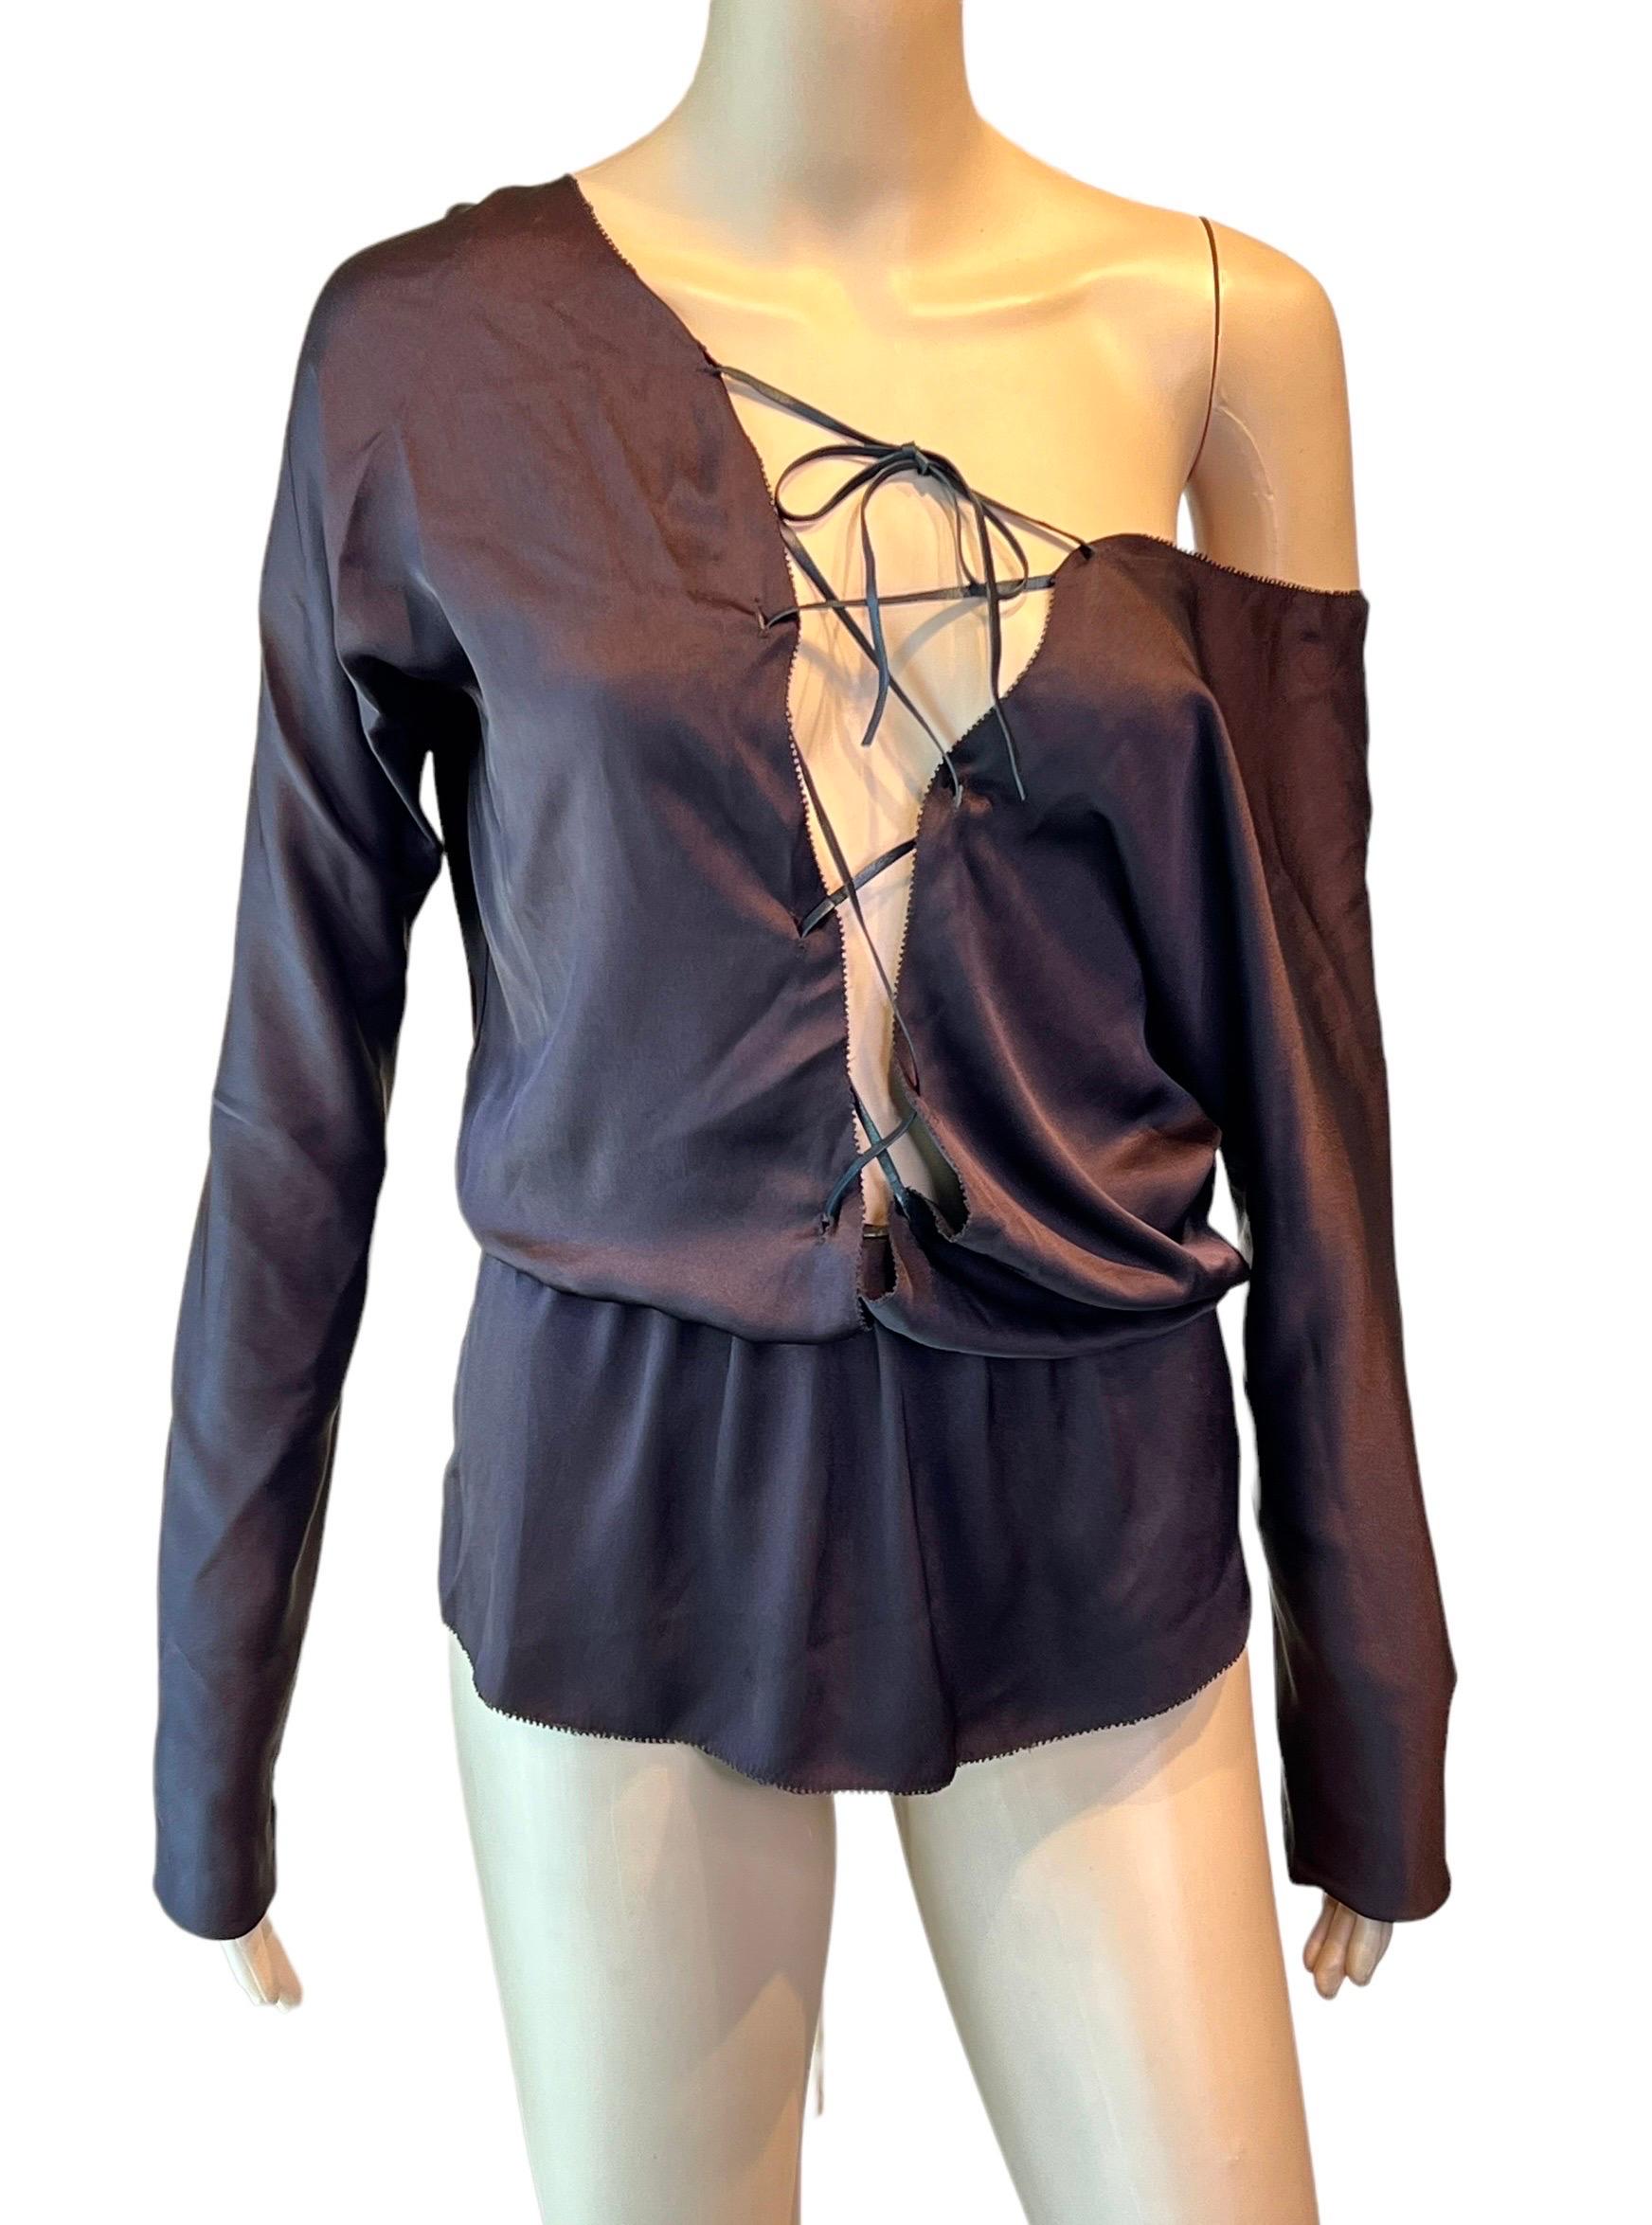 Tom Ford for Gucci F/W 2002 Runway Plunging Silk Lace-Up Brown Blouse Top In Good Condition For Sale In Naples, FL